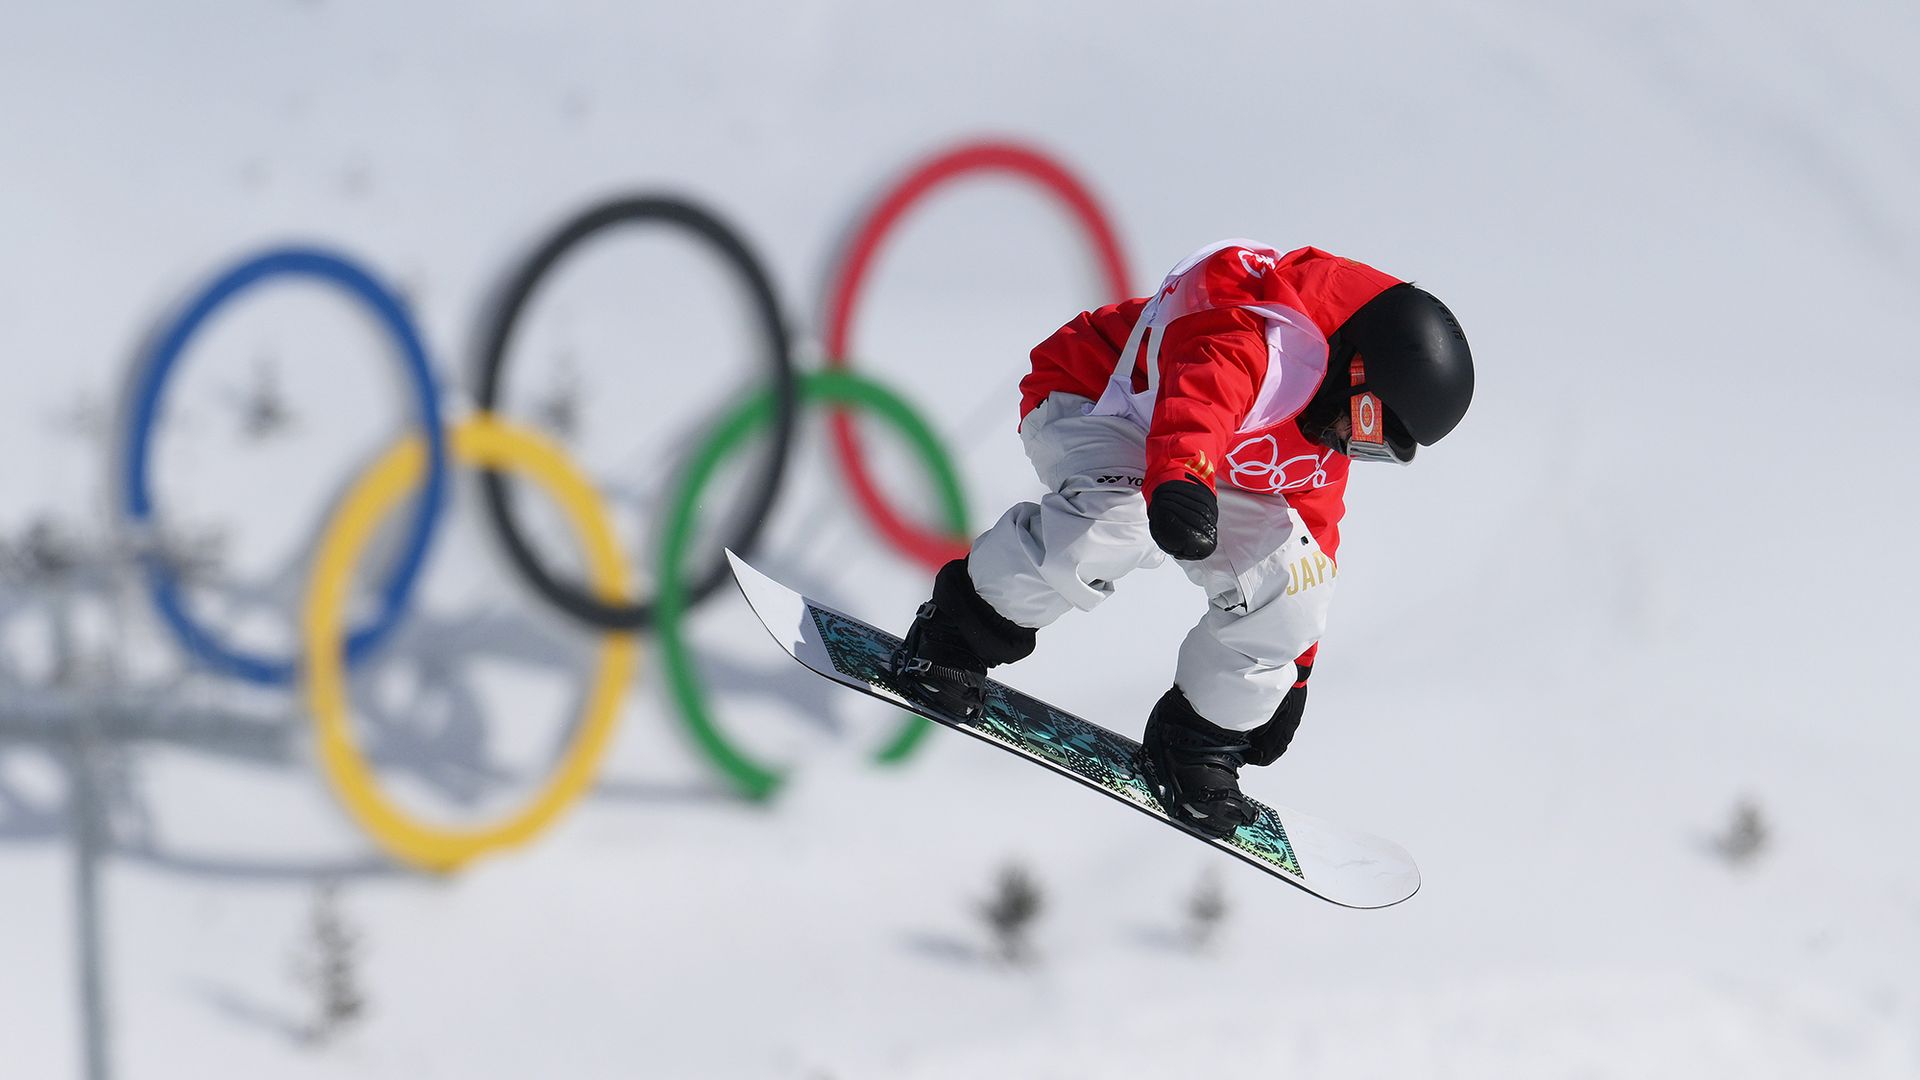 Winter Olympics 2022 snowboarding How to watch, events and TV schedule